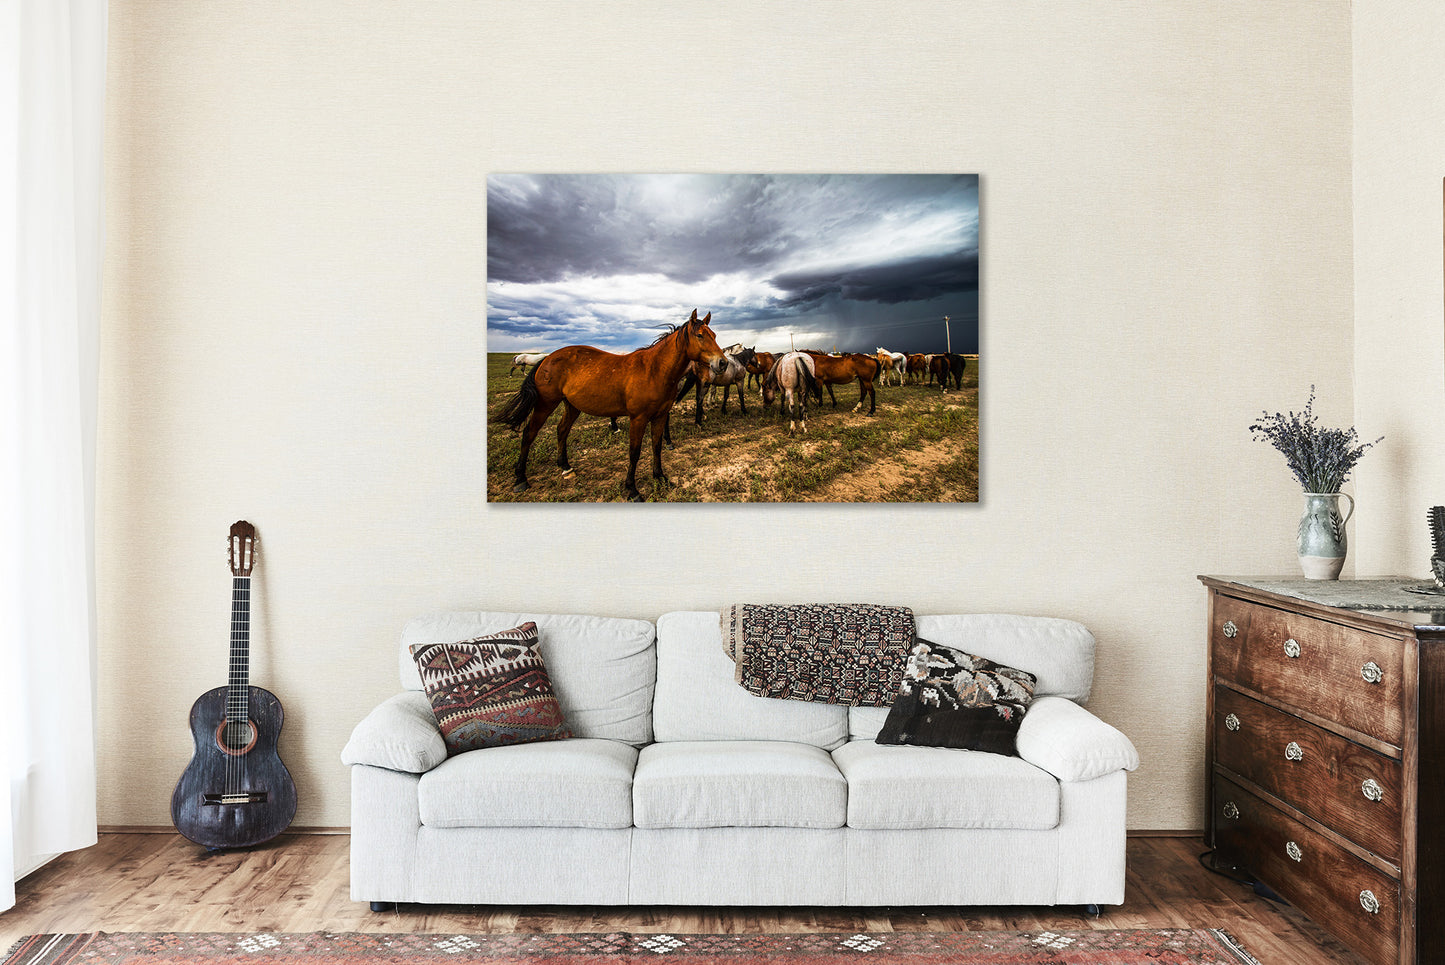 Equine Metal Print (Ready to Hang) Photo on Aluminum of Horse Watching Over Herd as Storm Approaches in Oklahoma Animal Wall Art Nature Decor